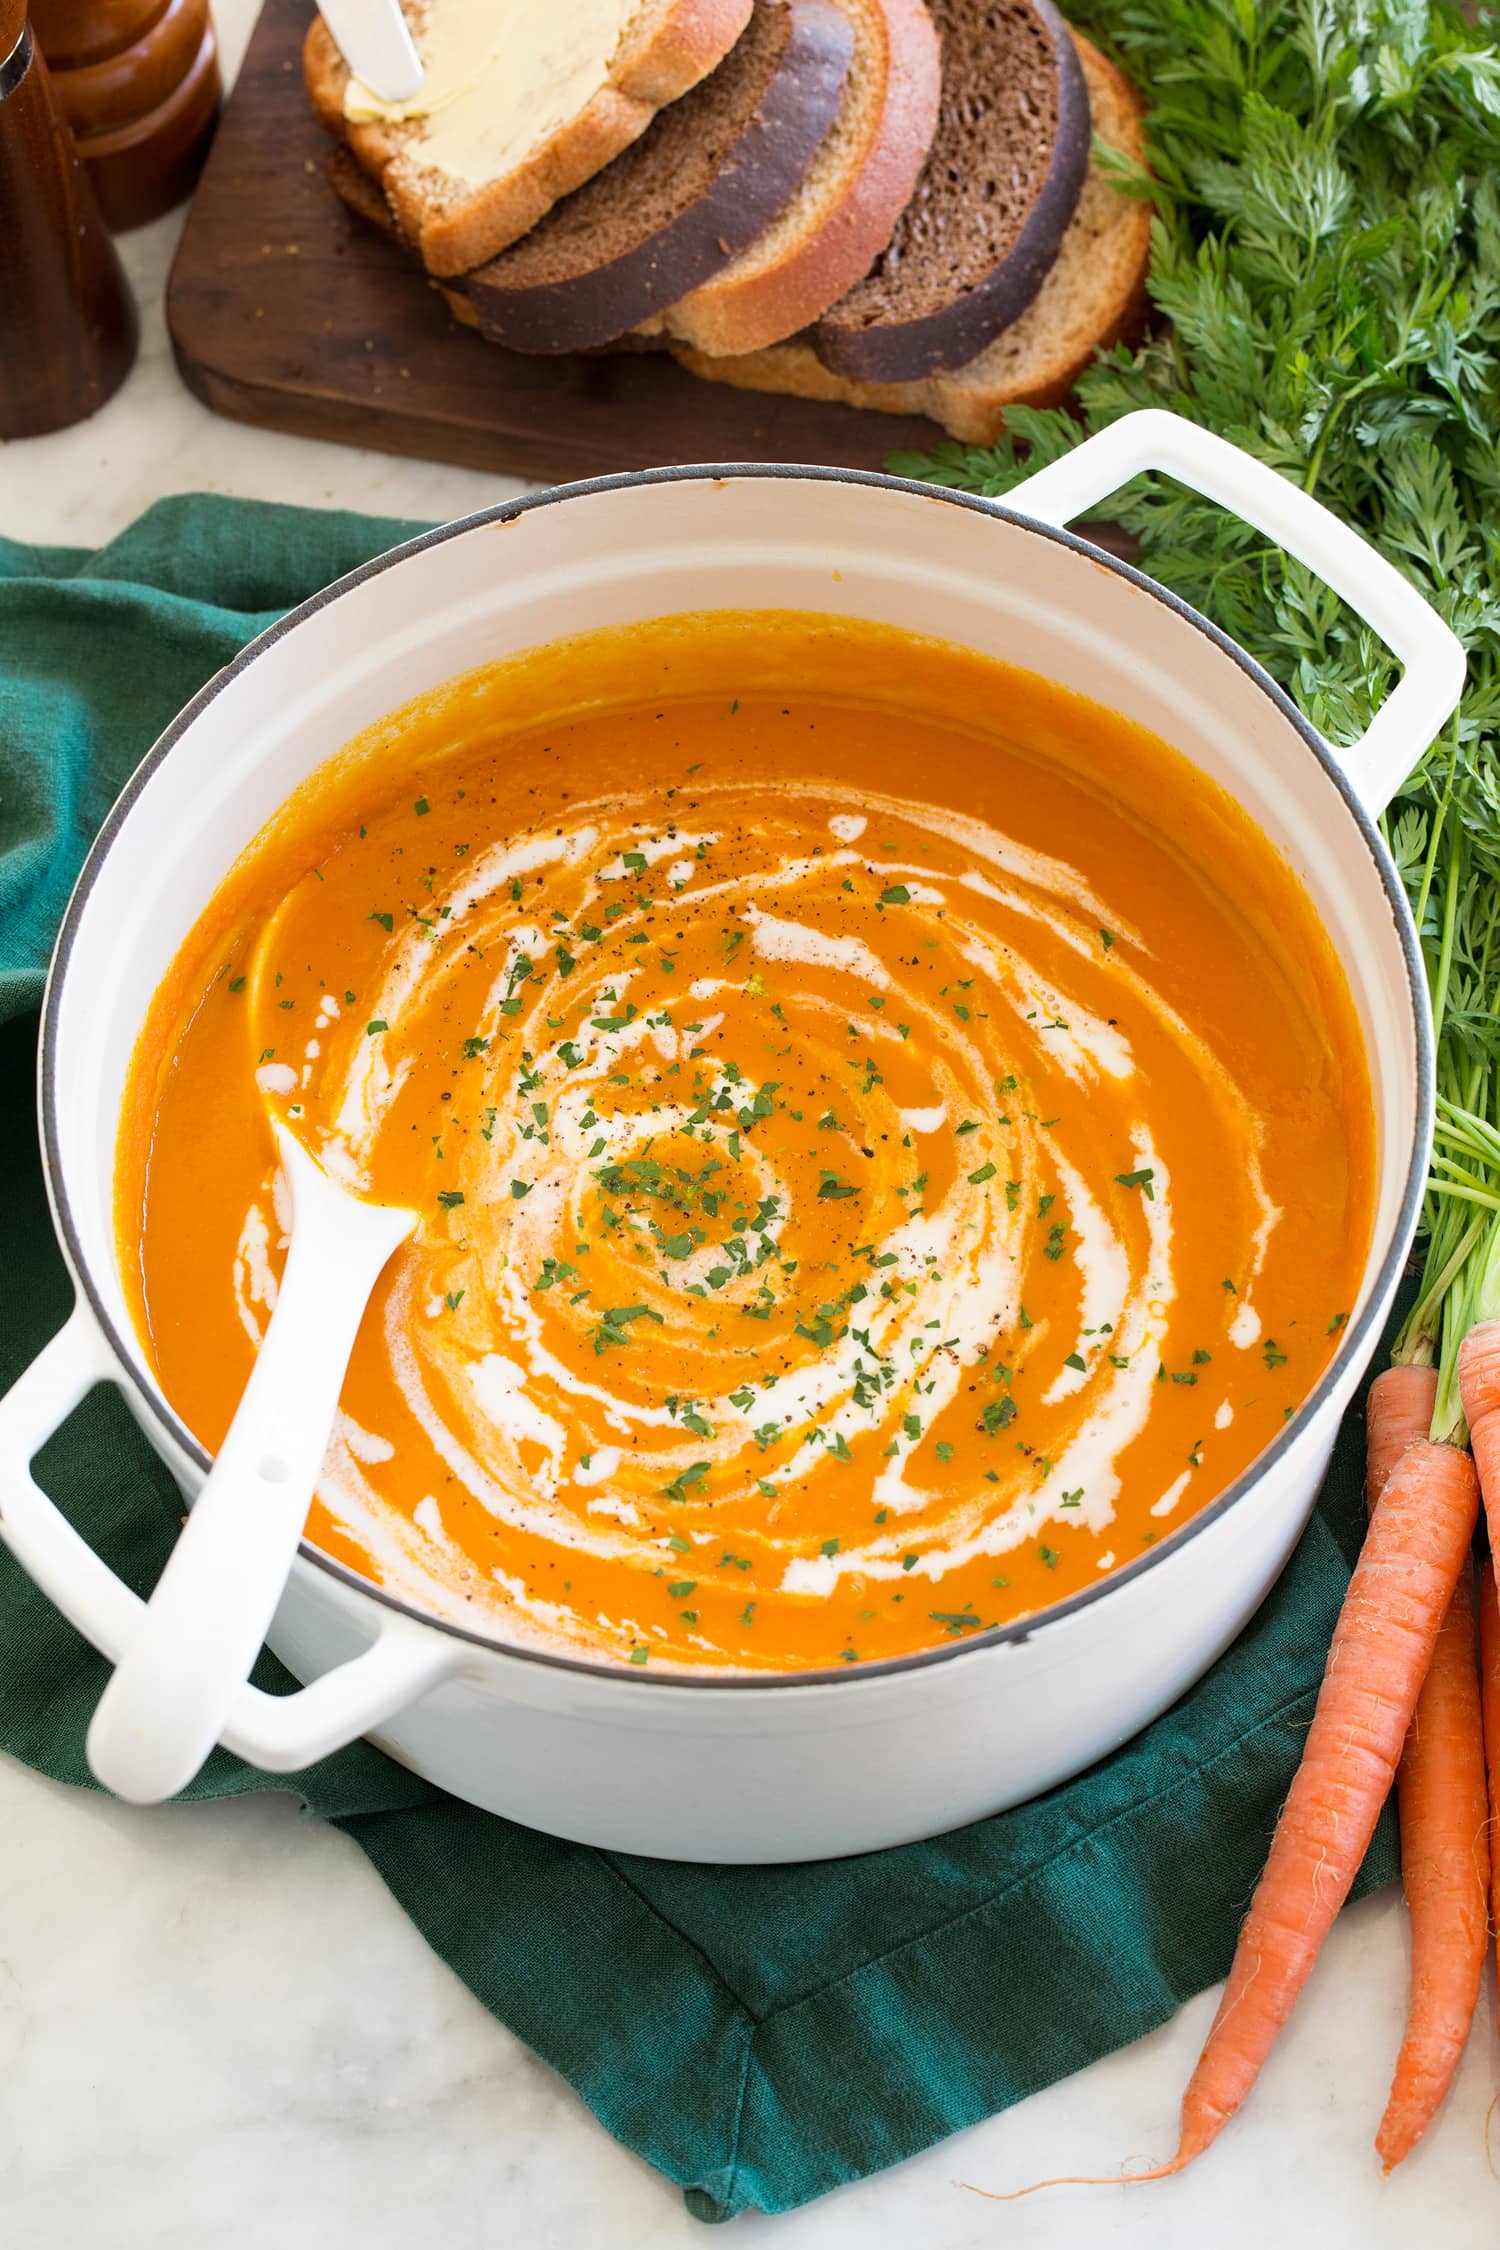 Carrot soup shown in a white enameled pot over a green cloth with fresh carrots to the side.